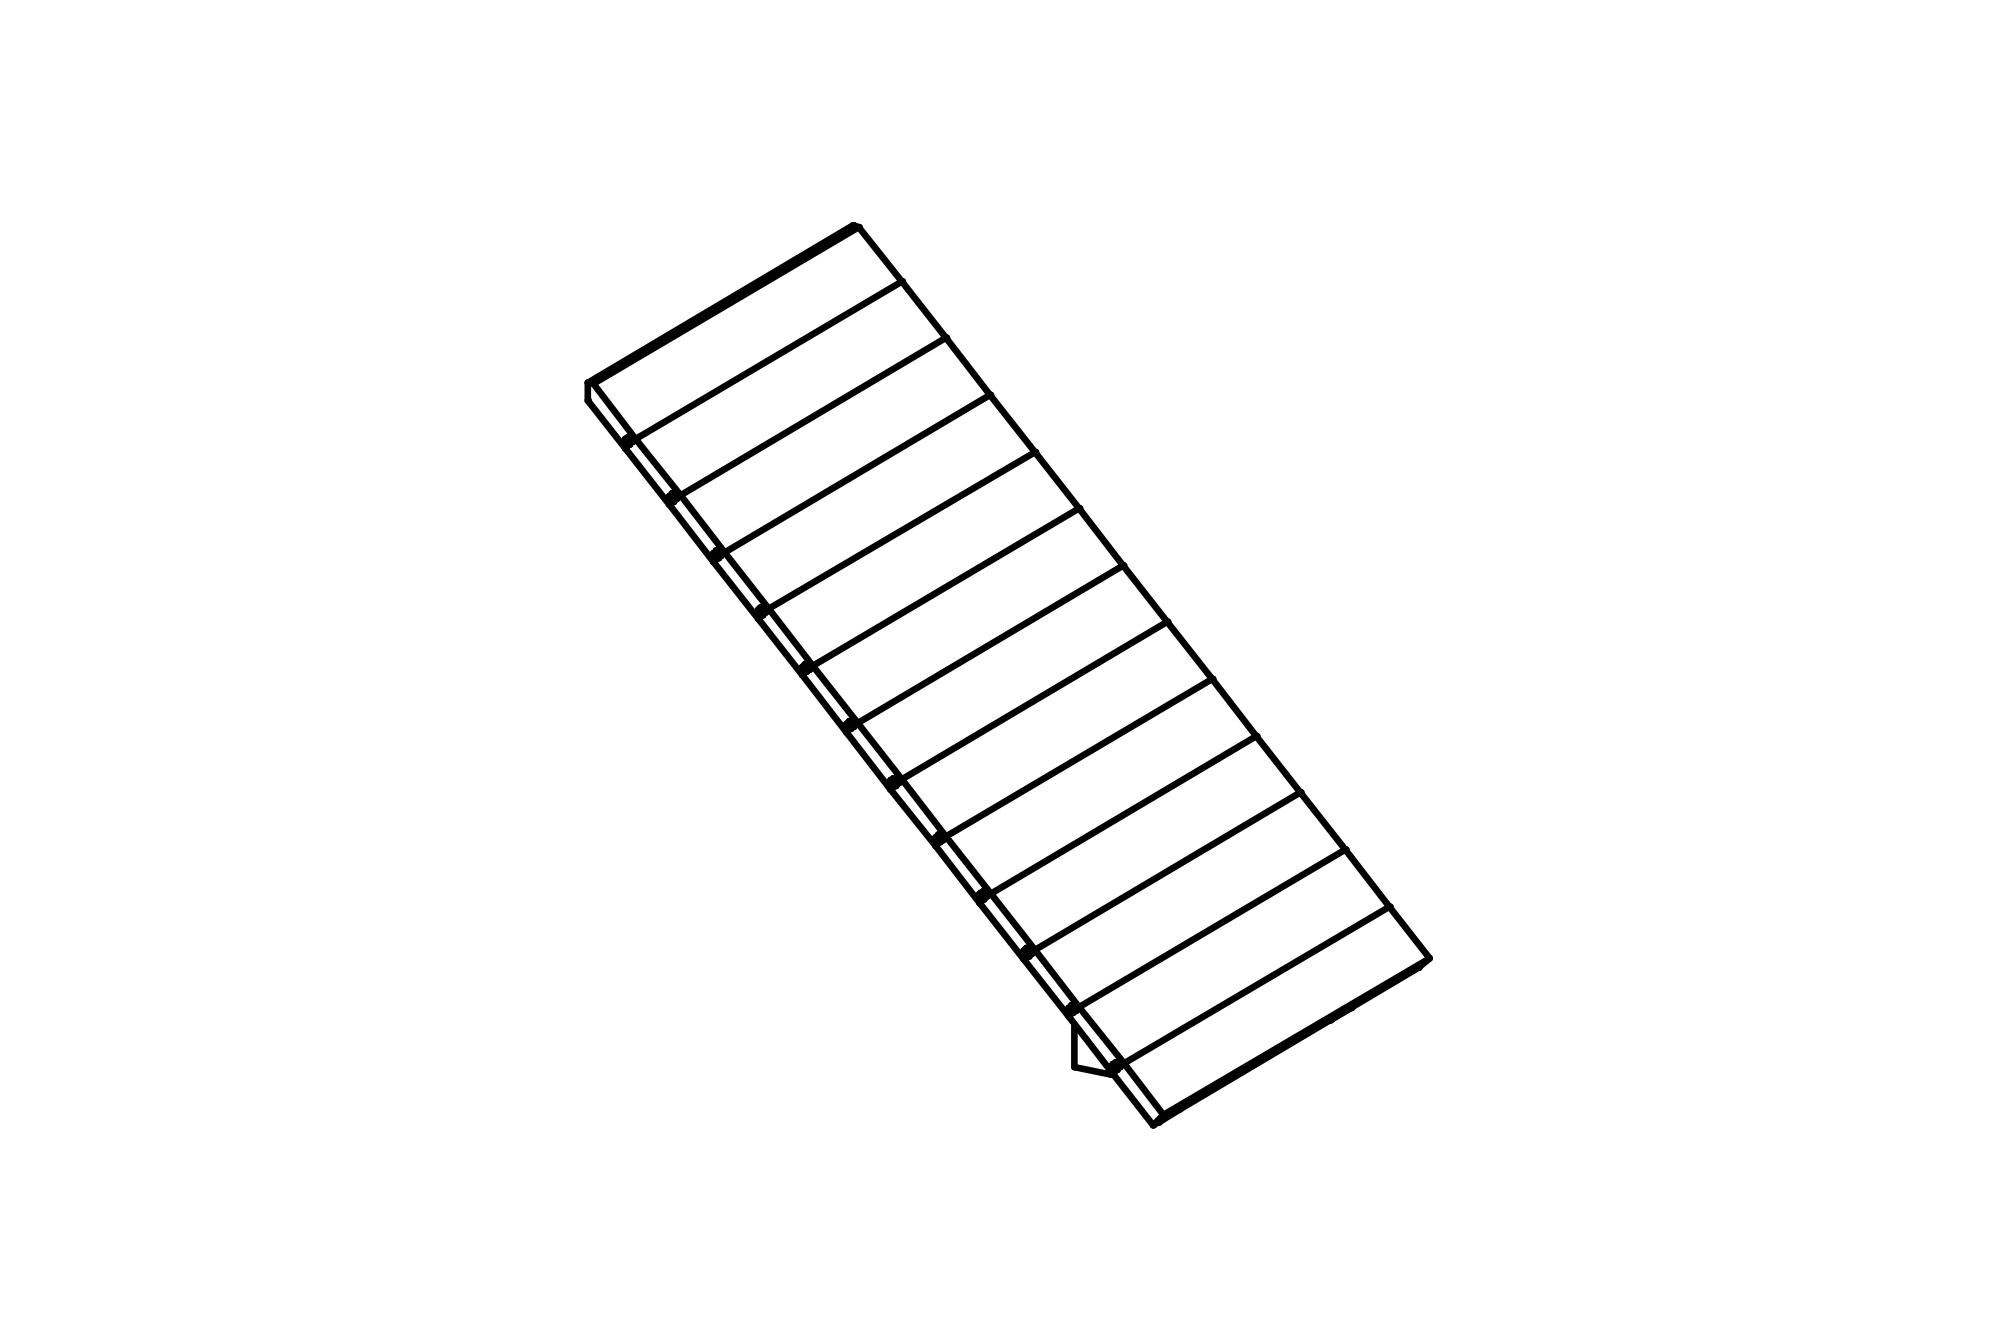 Inclined Wall for huts, height = 1m